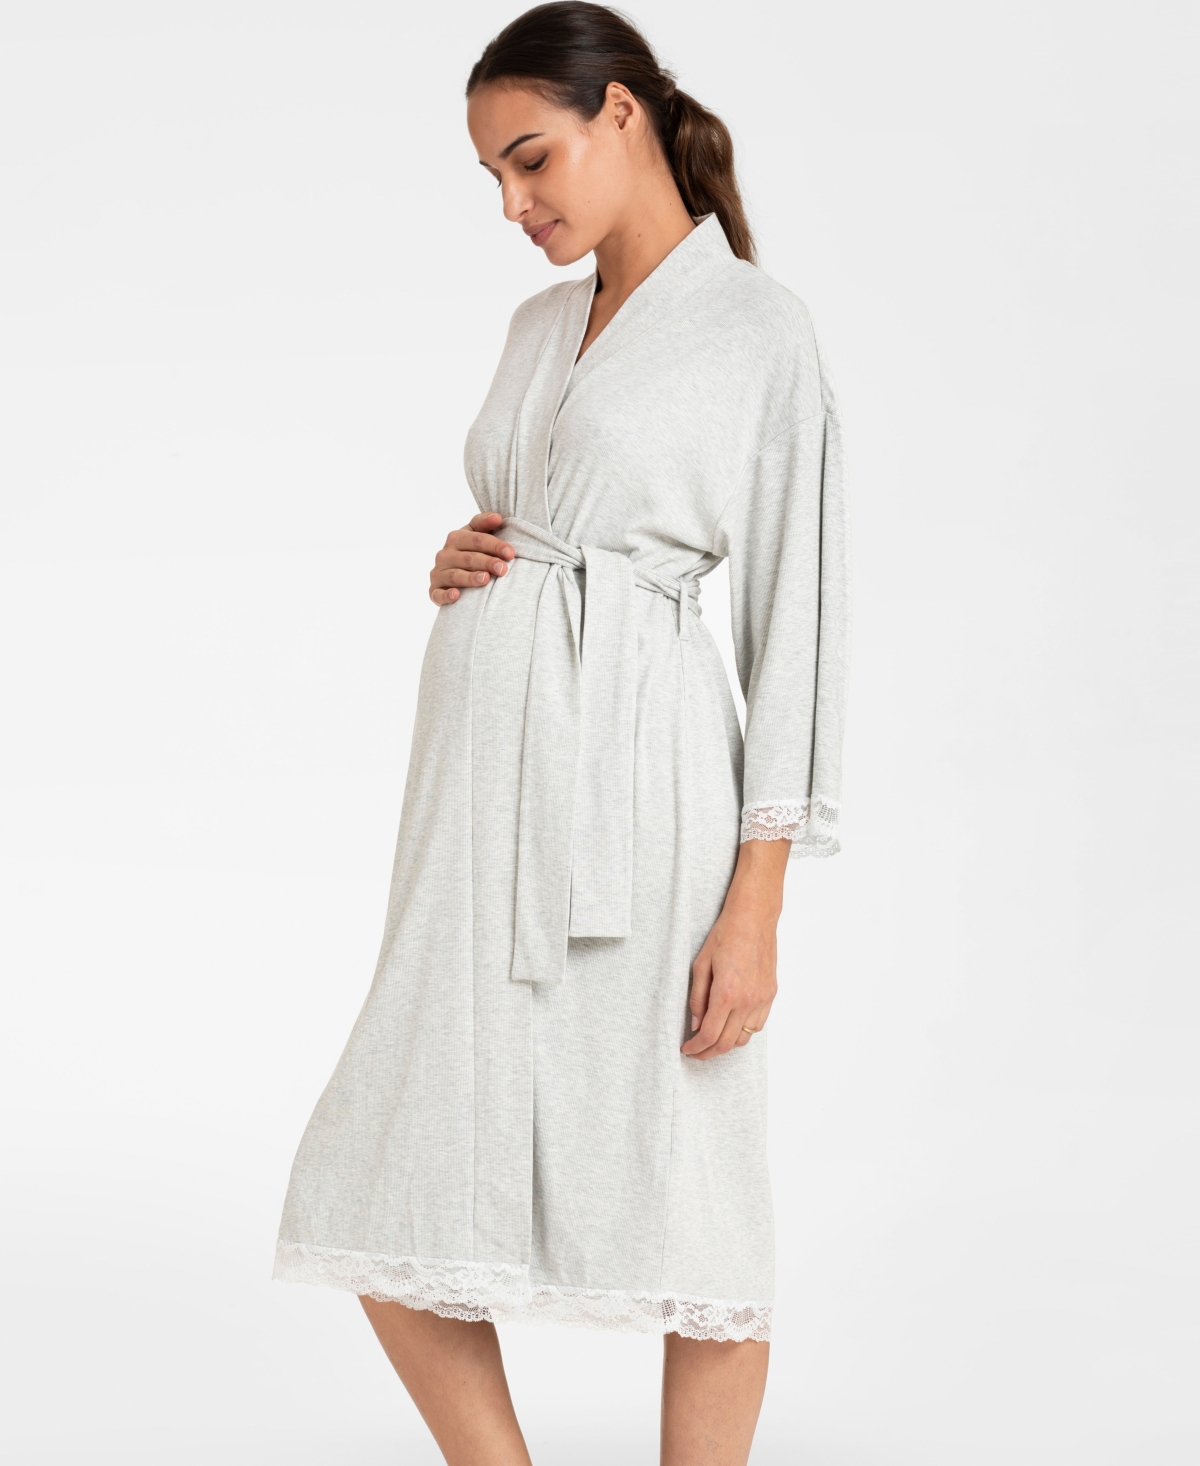 Seraphine Women's Maternity And Nursing Dressing Gown In Gray Marl